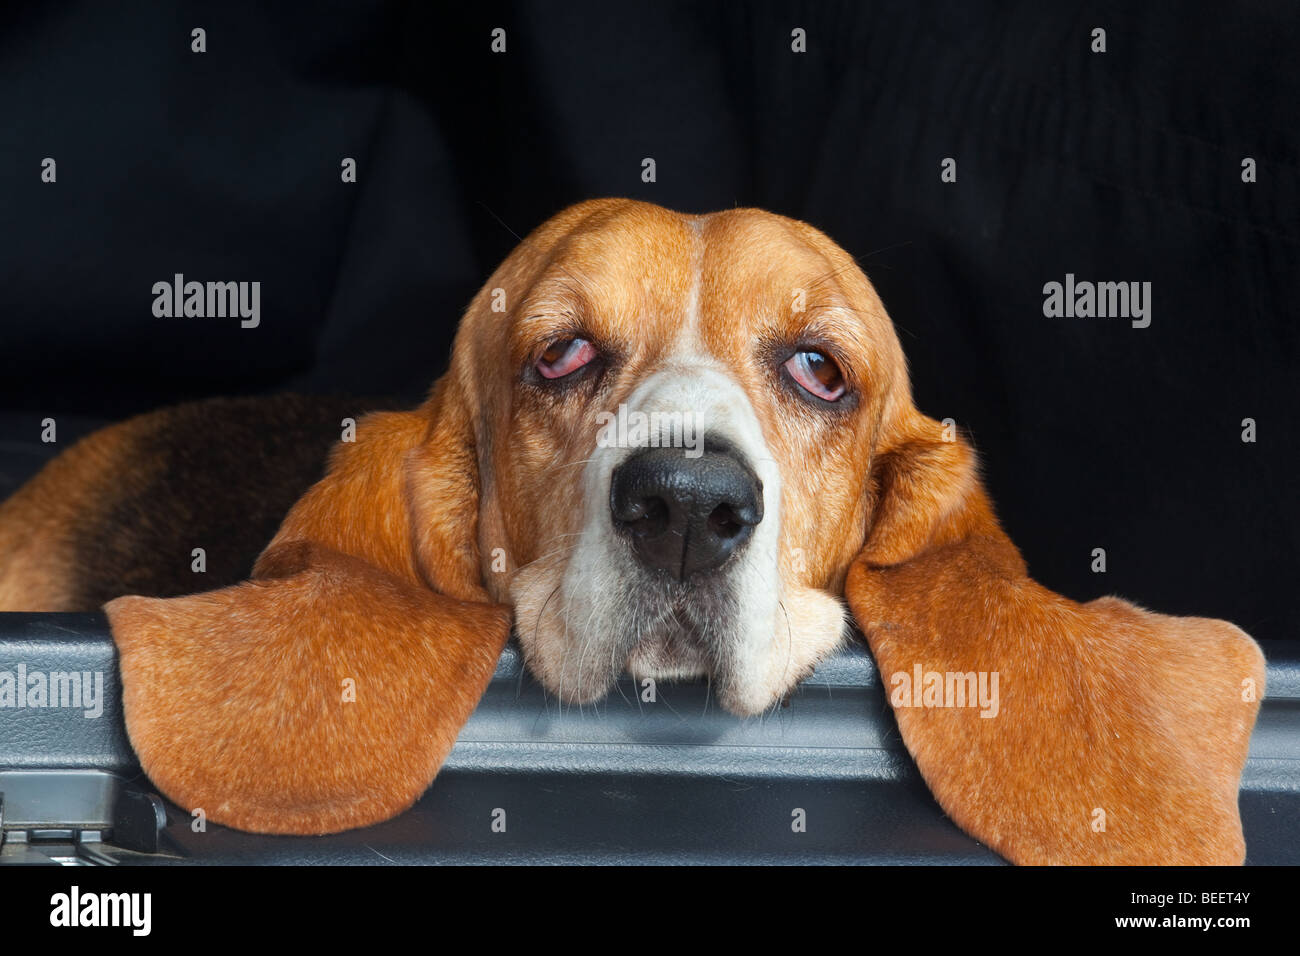 Basset Hound portrait in home environment Stock Photo